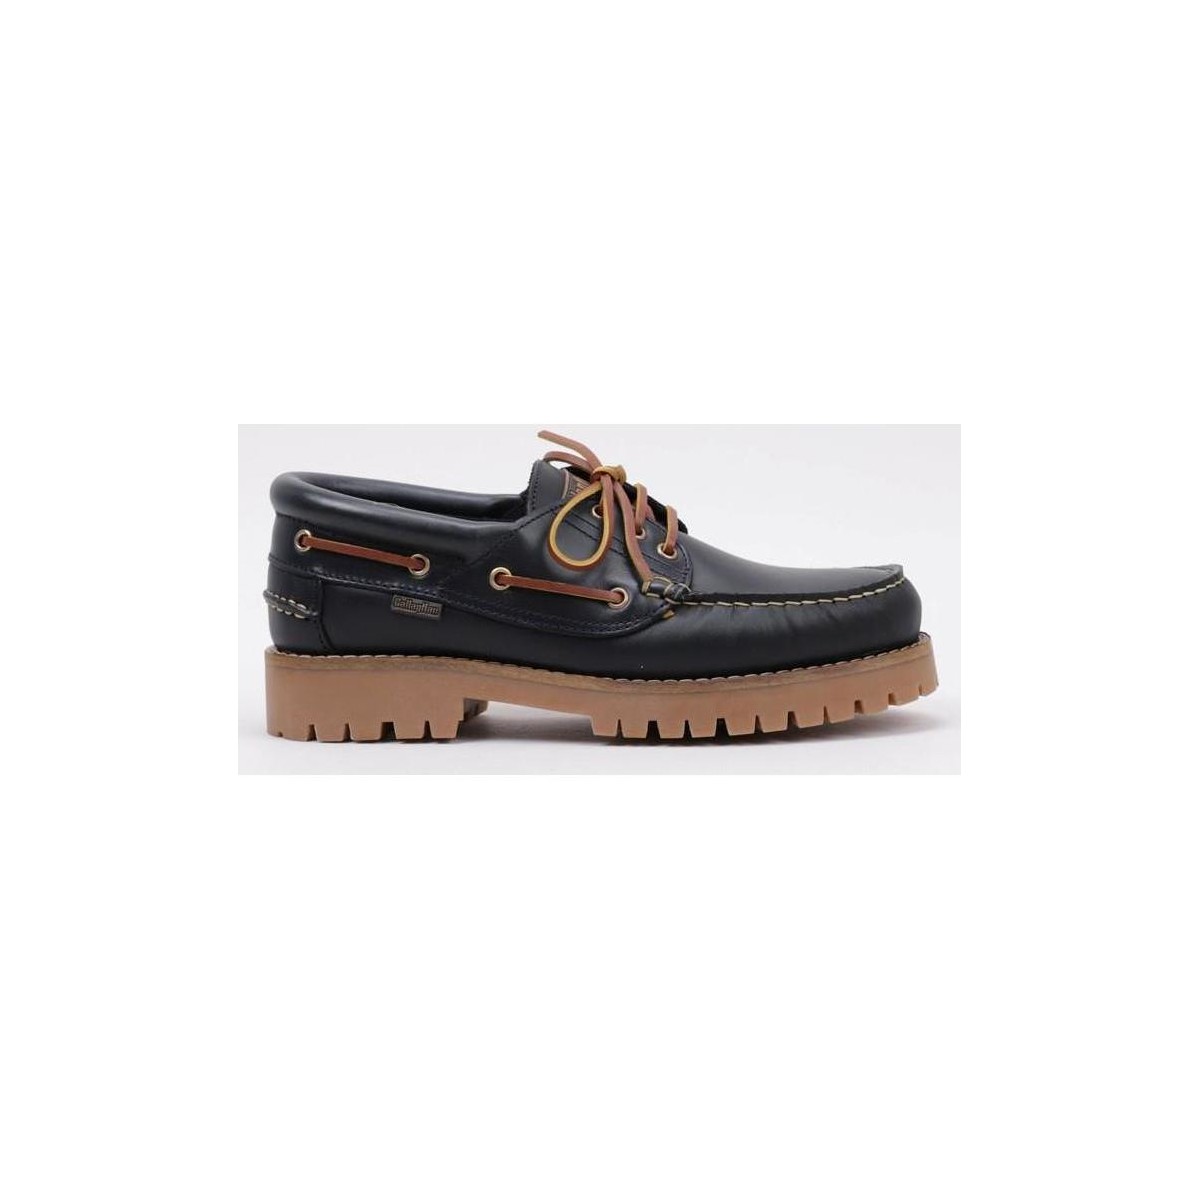 Boat shoes CallagHan 21910